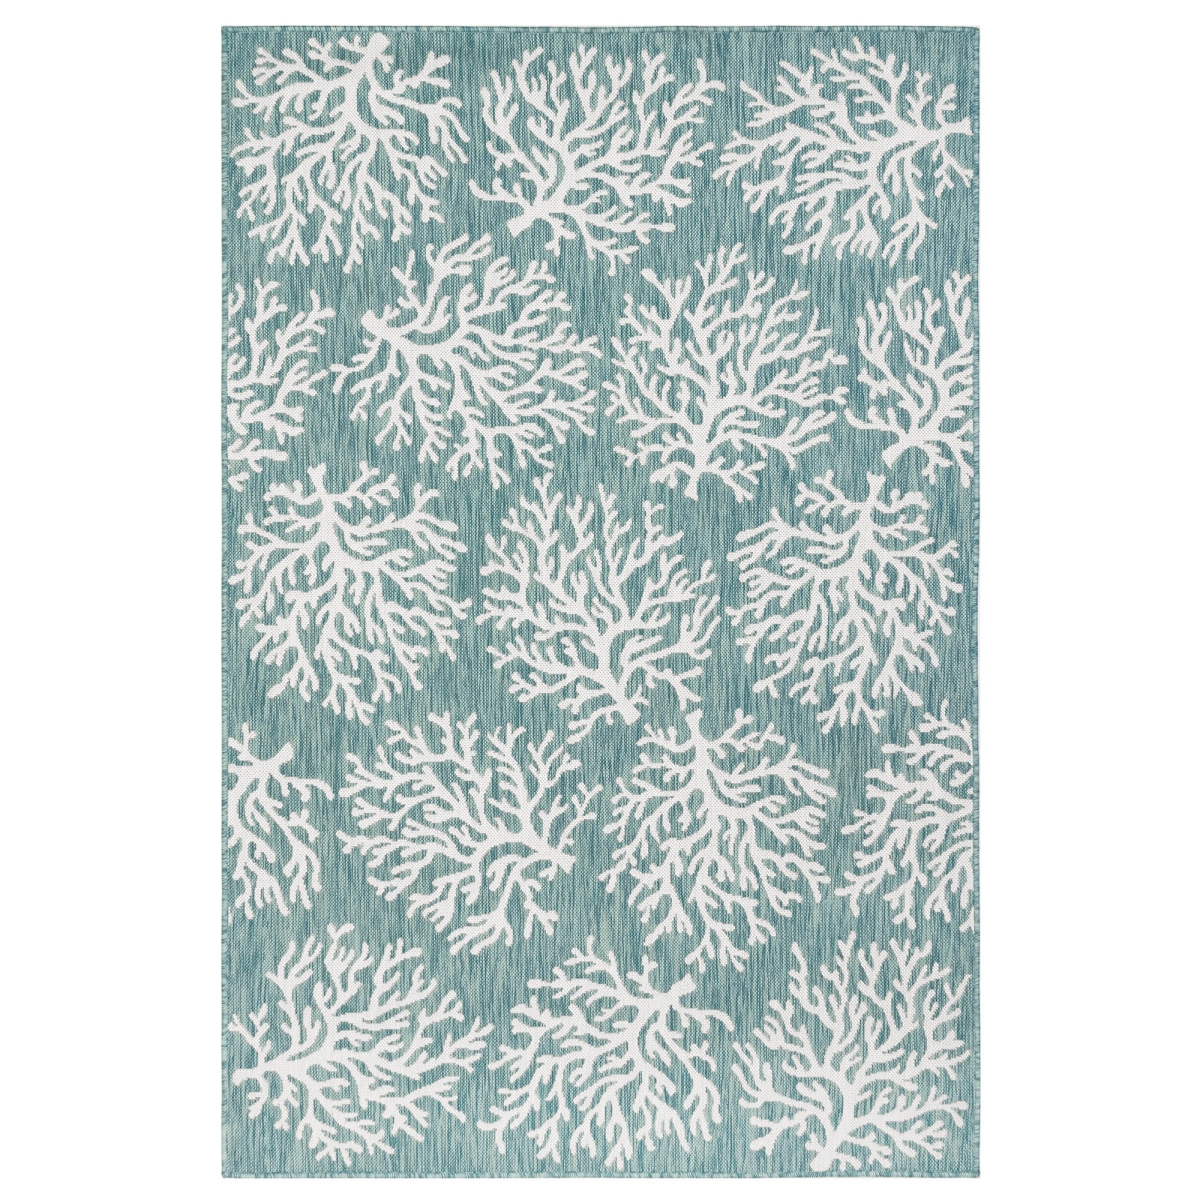 Trans-ocean Imports Cre58844104 Liora Manne Carmel Coral Indoor & Outdoor Rug, Aqua - 4 Ft. 10 In. X 7 Ft. 6 In.